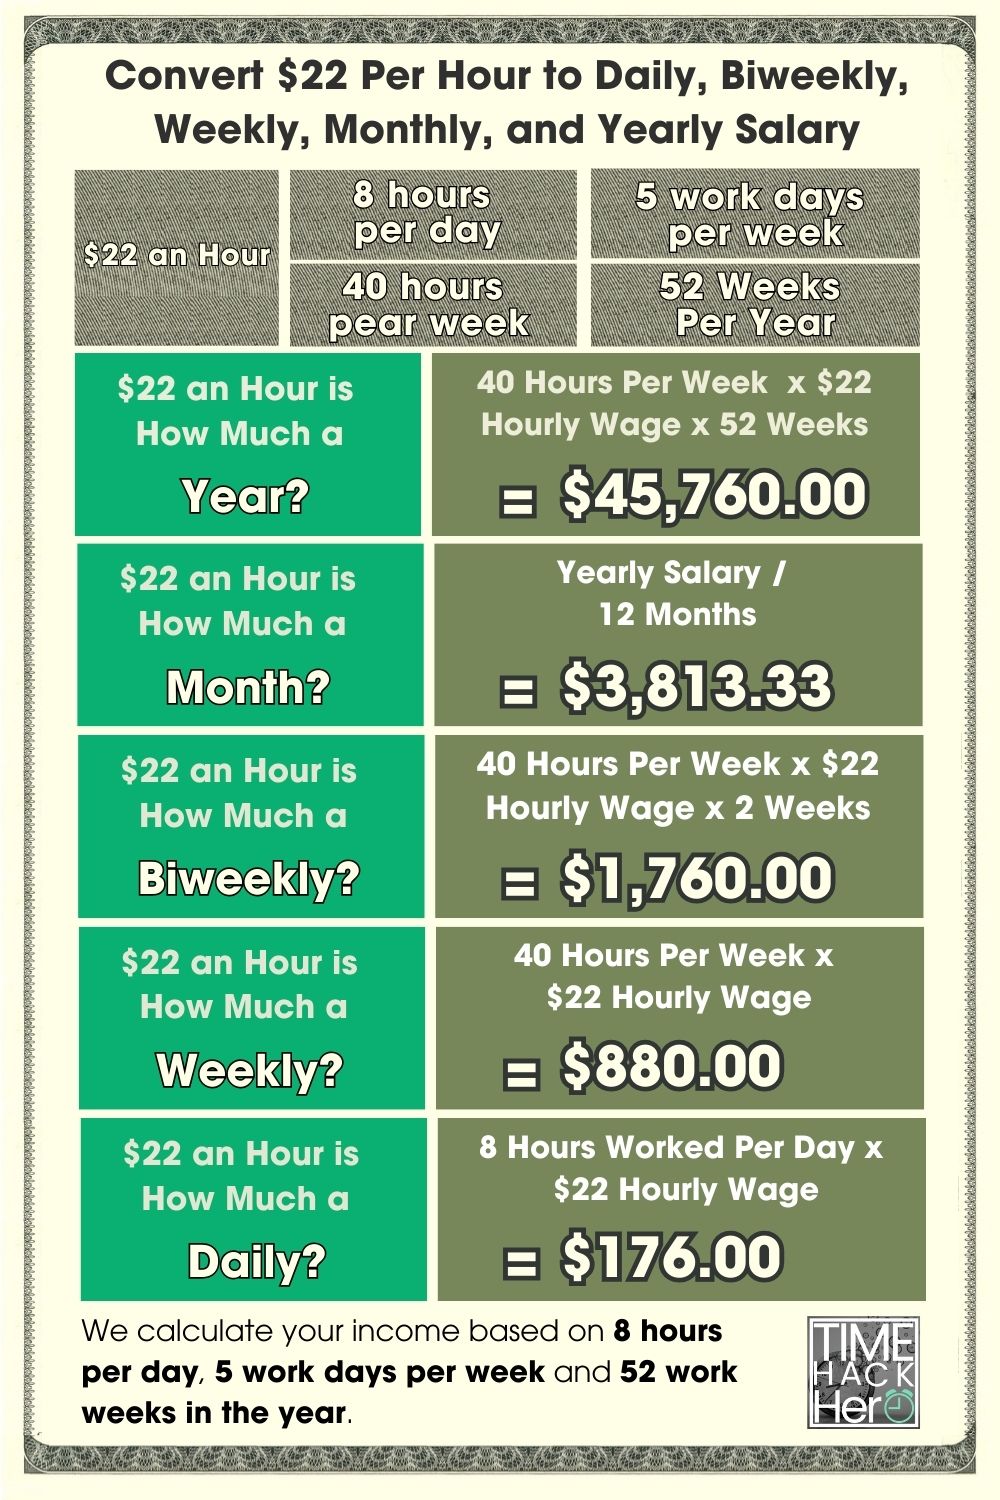 Convert $22 Per Hour to Daily, Biweekly, Weekly, Monthly, and Yearly Salary